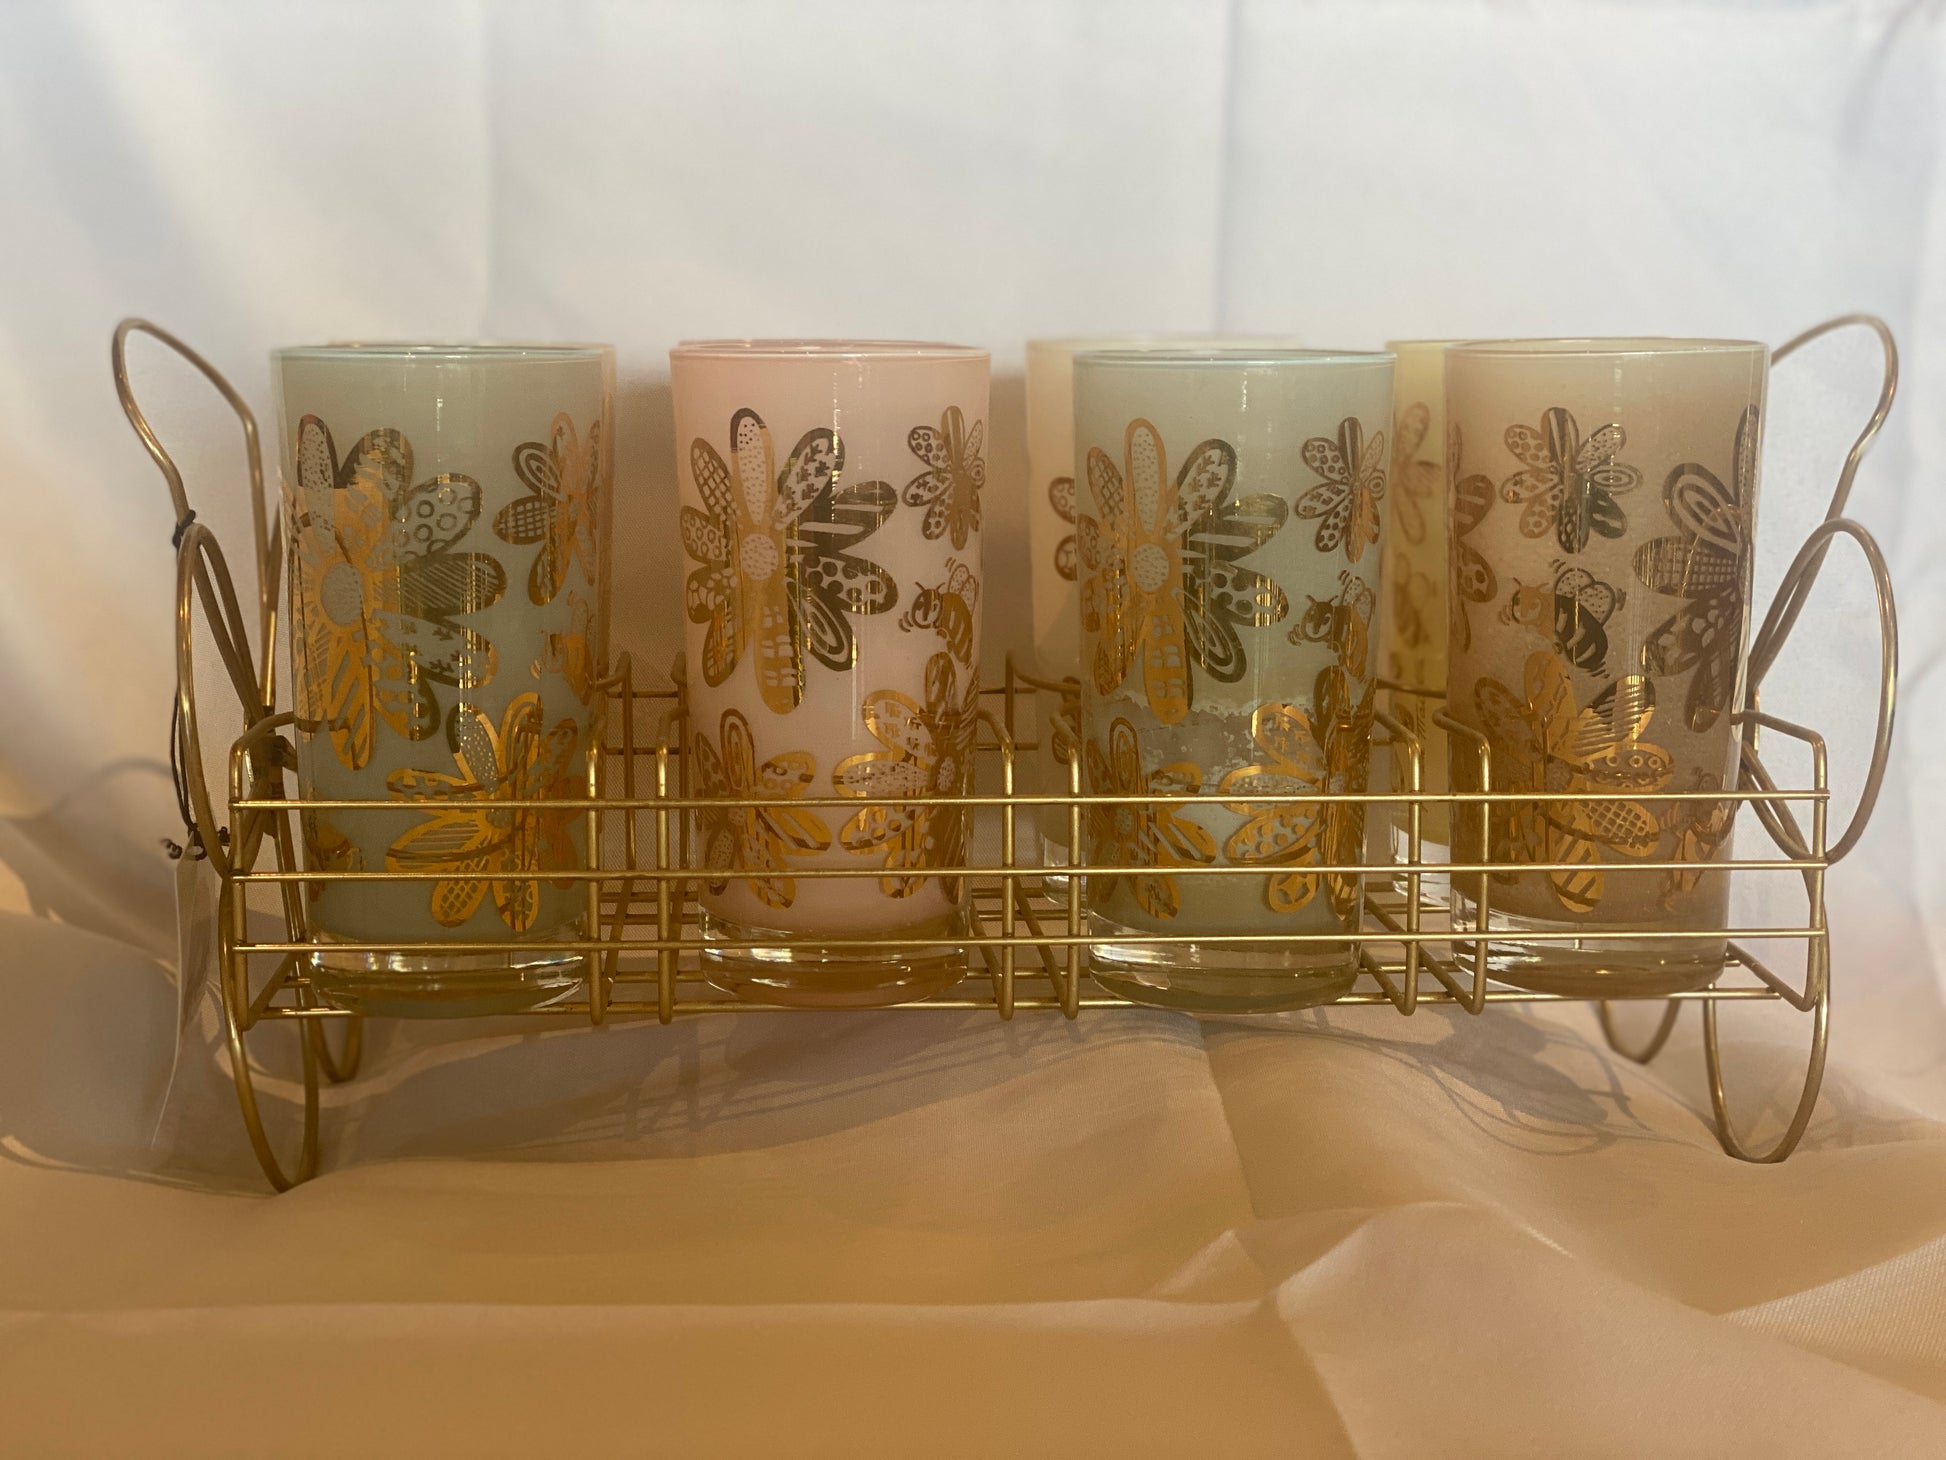 These fabulous Frank Maietta tumblers with flowers and bees in the original caddy are a rare find. The pastels colors are dreamy. One has a tiny chip, but the rest are in perfect shape. They are stunning! Got them on a hunt in Taos, New Mexico!